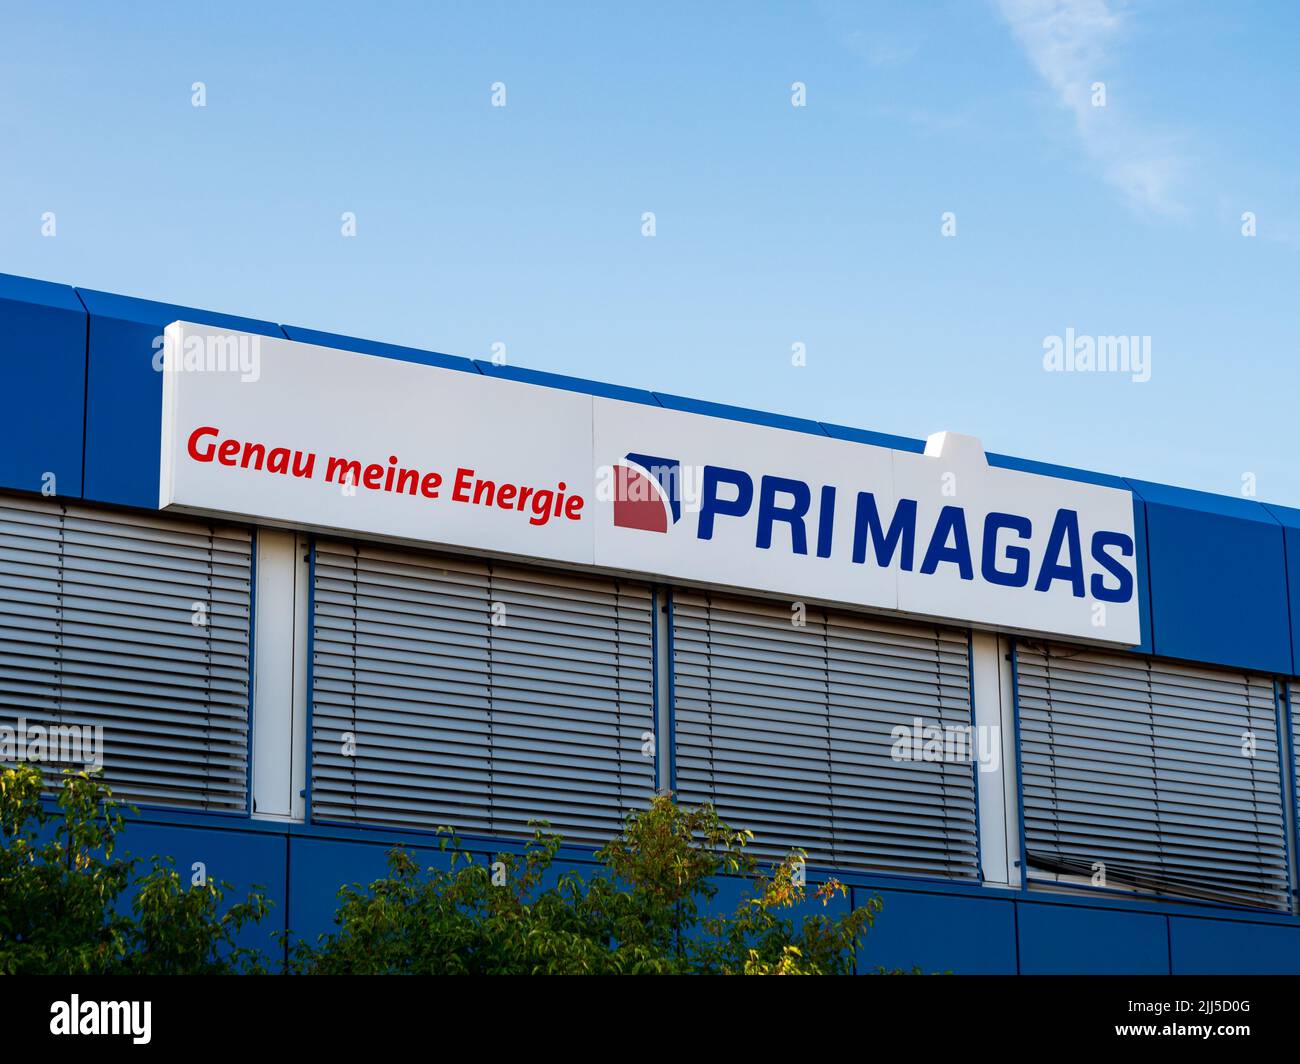 Primagas energy company in Saxony. Business with liquid gas in Germany. The big logo in on the building exterior. Facade of the office house. Stock Photo